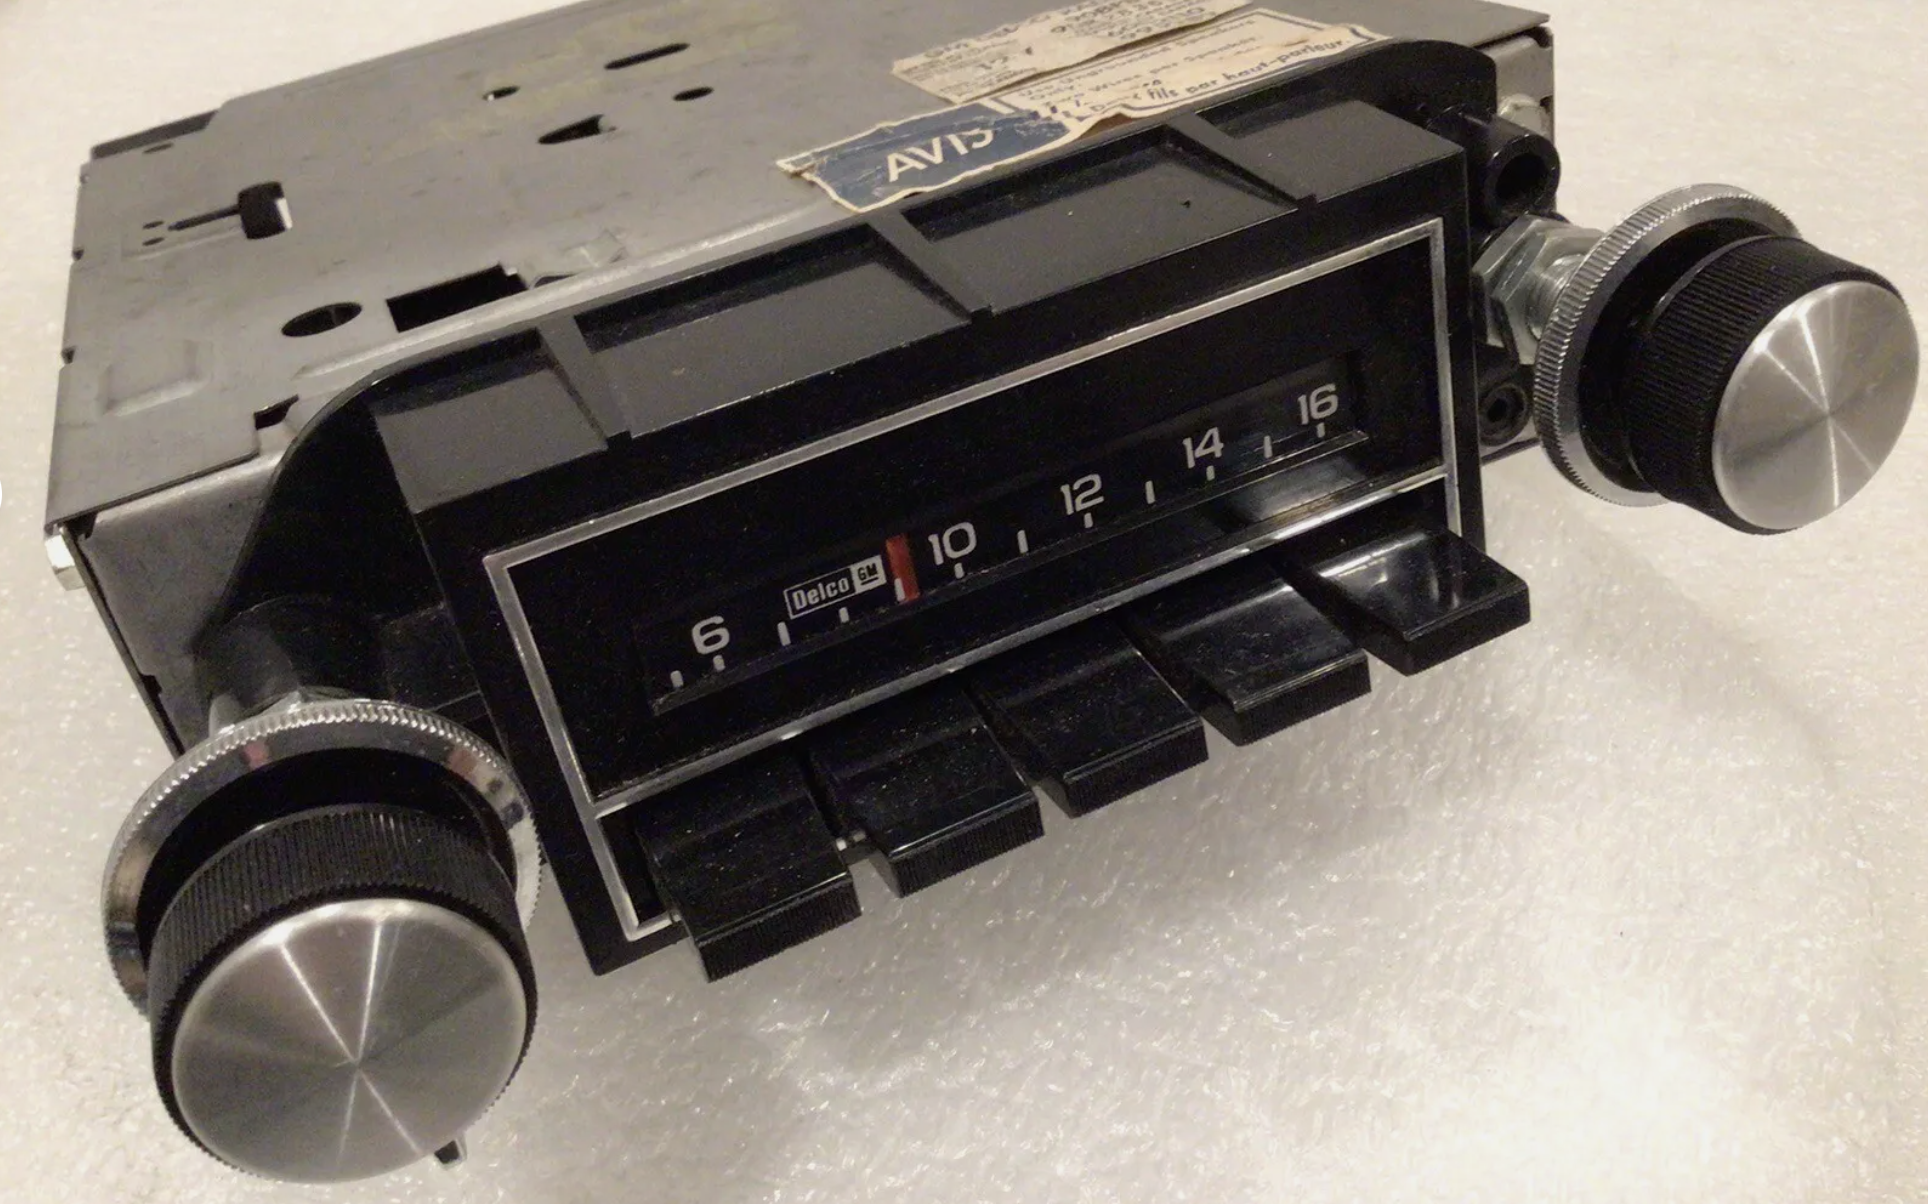 Vintage car radio with black knobs, a tuning dial, numbered scale from 6 to 16, and labeled &quot;Delco.&quot; The unit has visible wear and a partial sticker